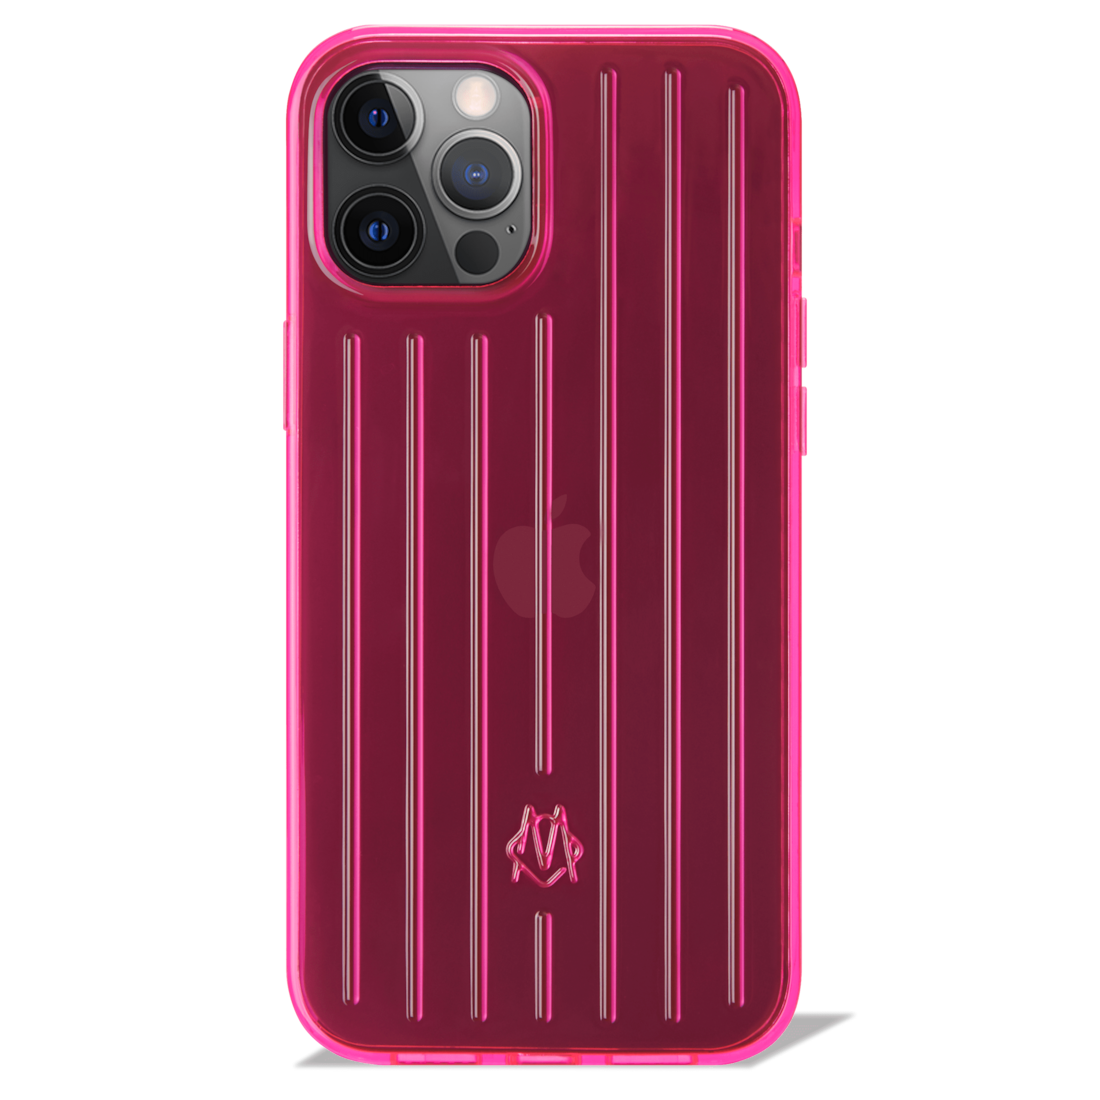 rimowa.com | Neon Pink Case for iPhone 12 Pro Max